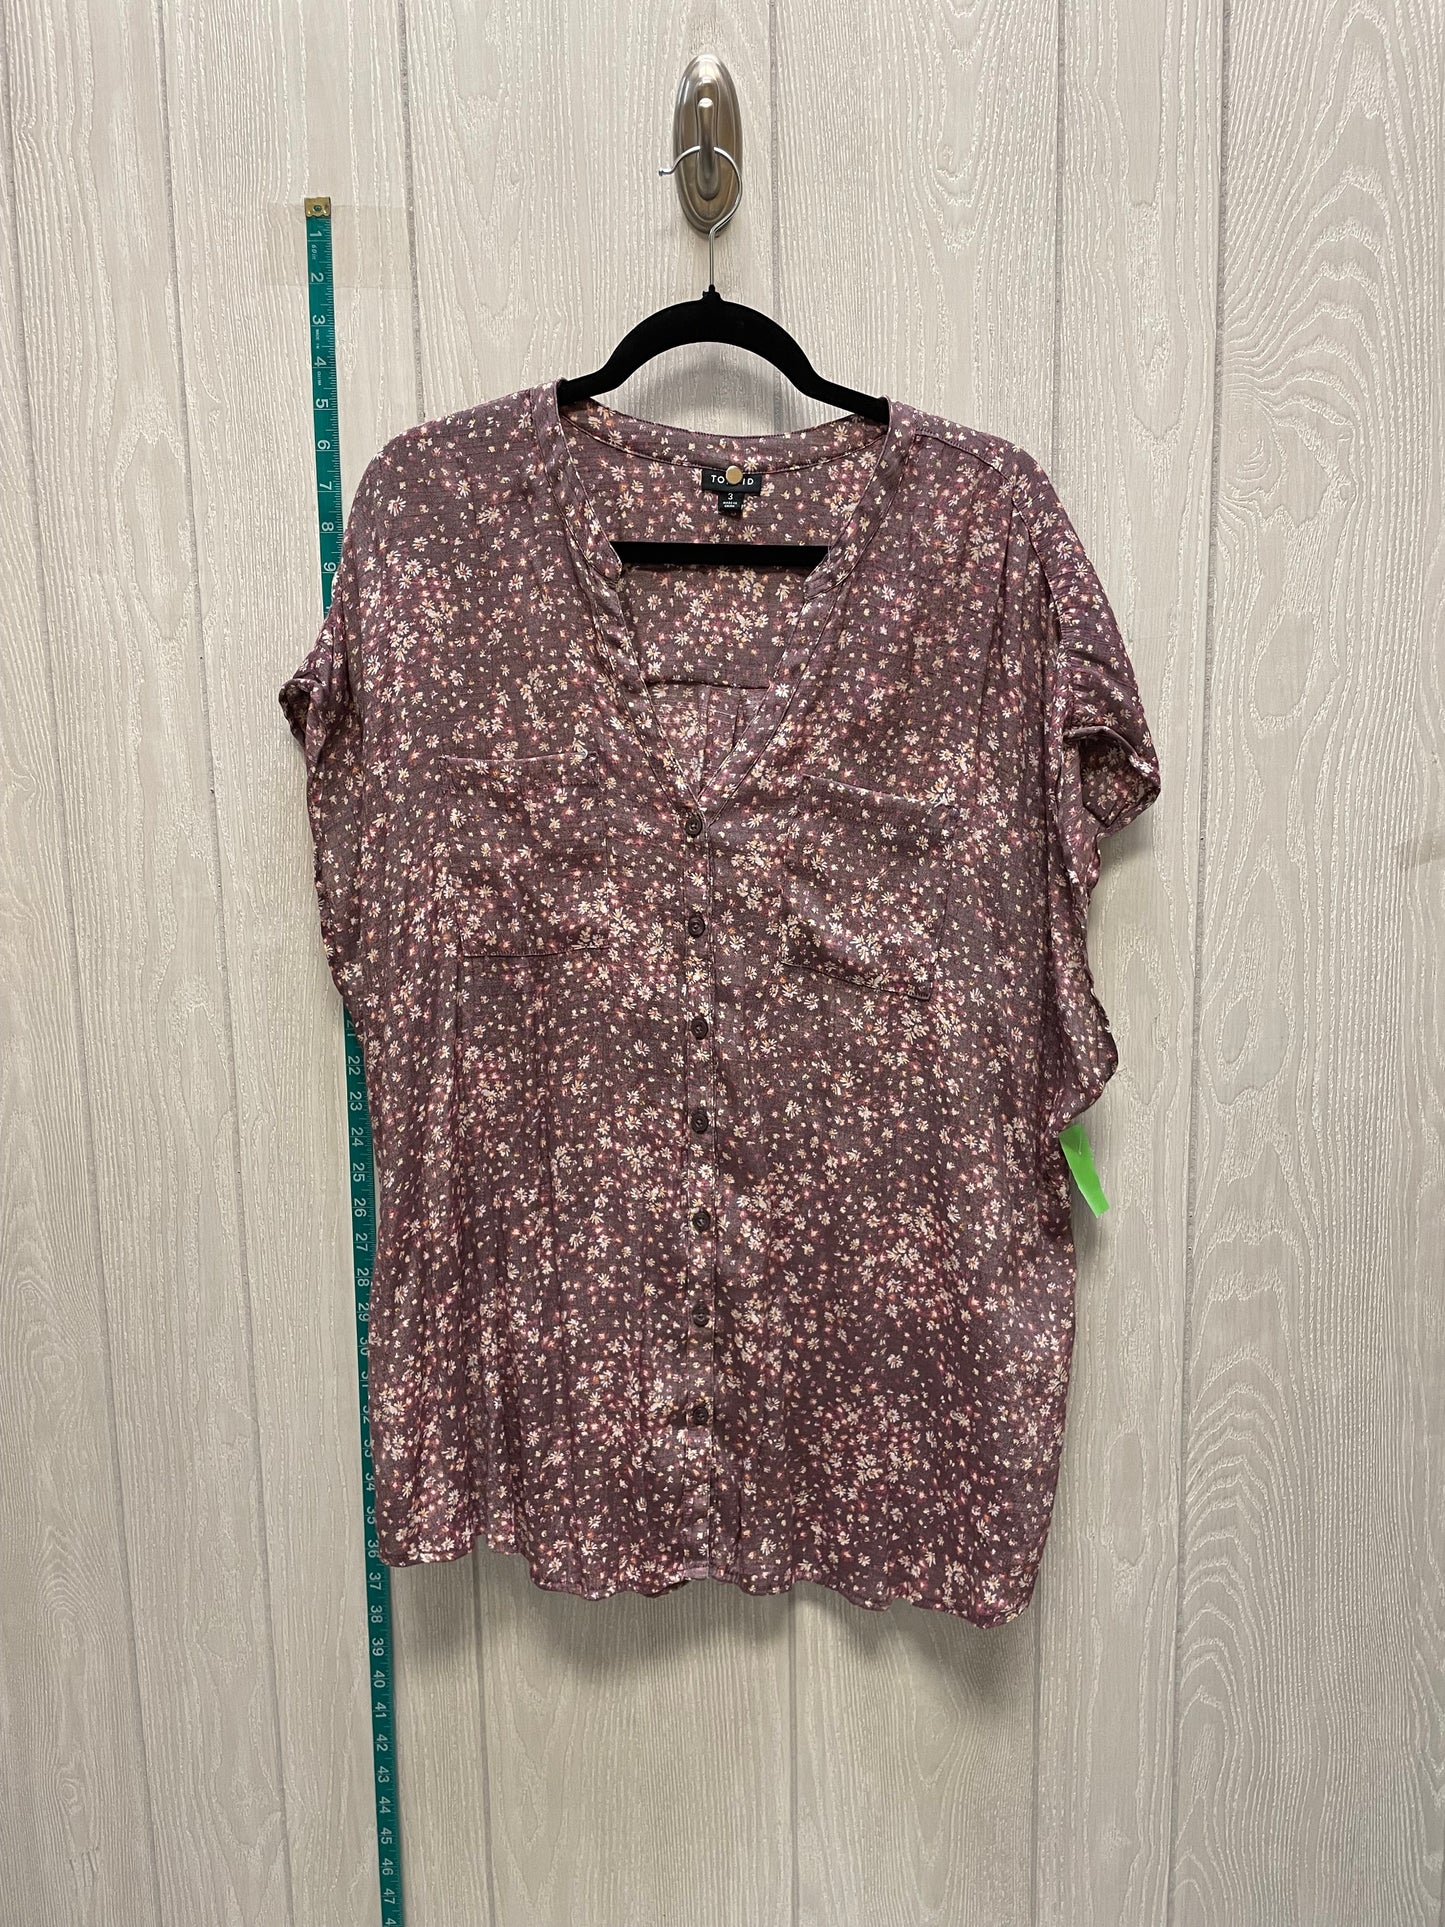 Blouse Short Sleeve By Torrid  Size: 2x